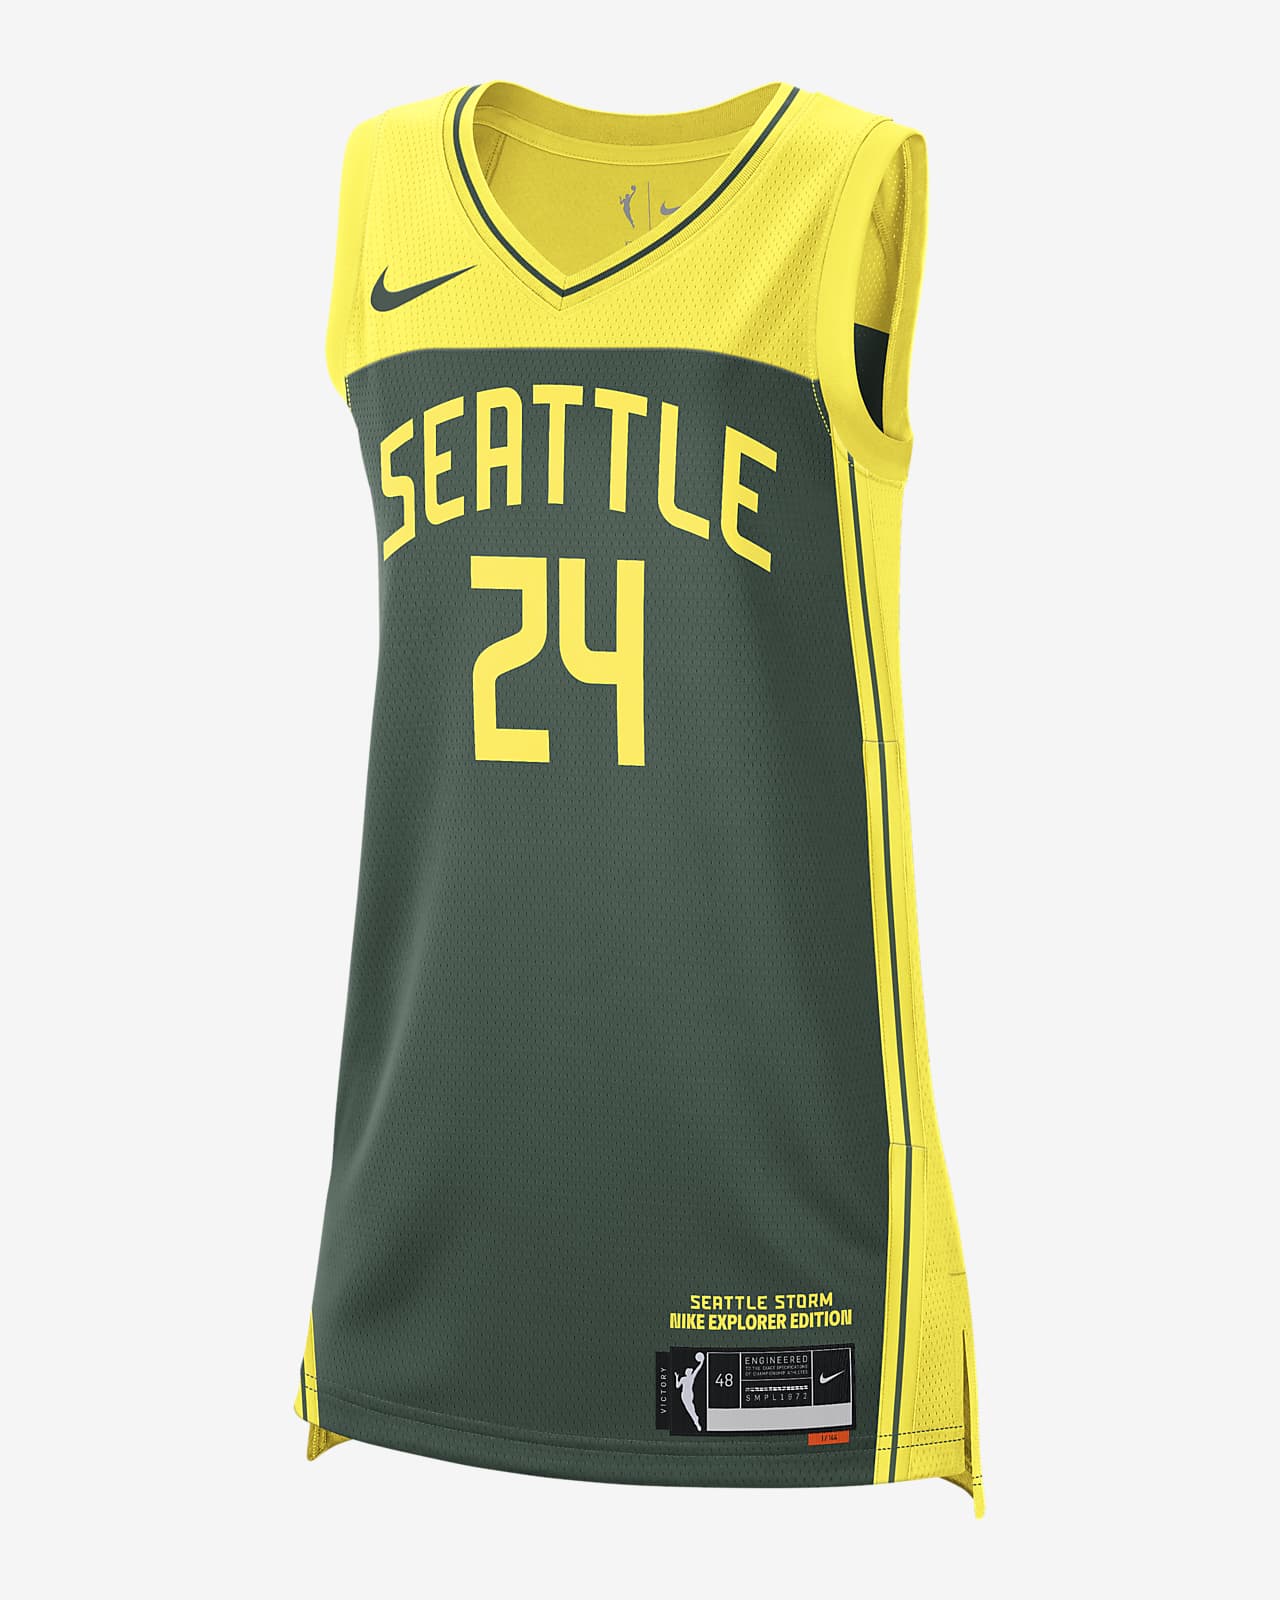 WNBA, Nike pull WWII-inspired jerseys honoring women empowerment after  learning about controversial past